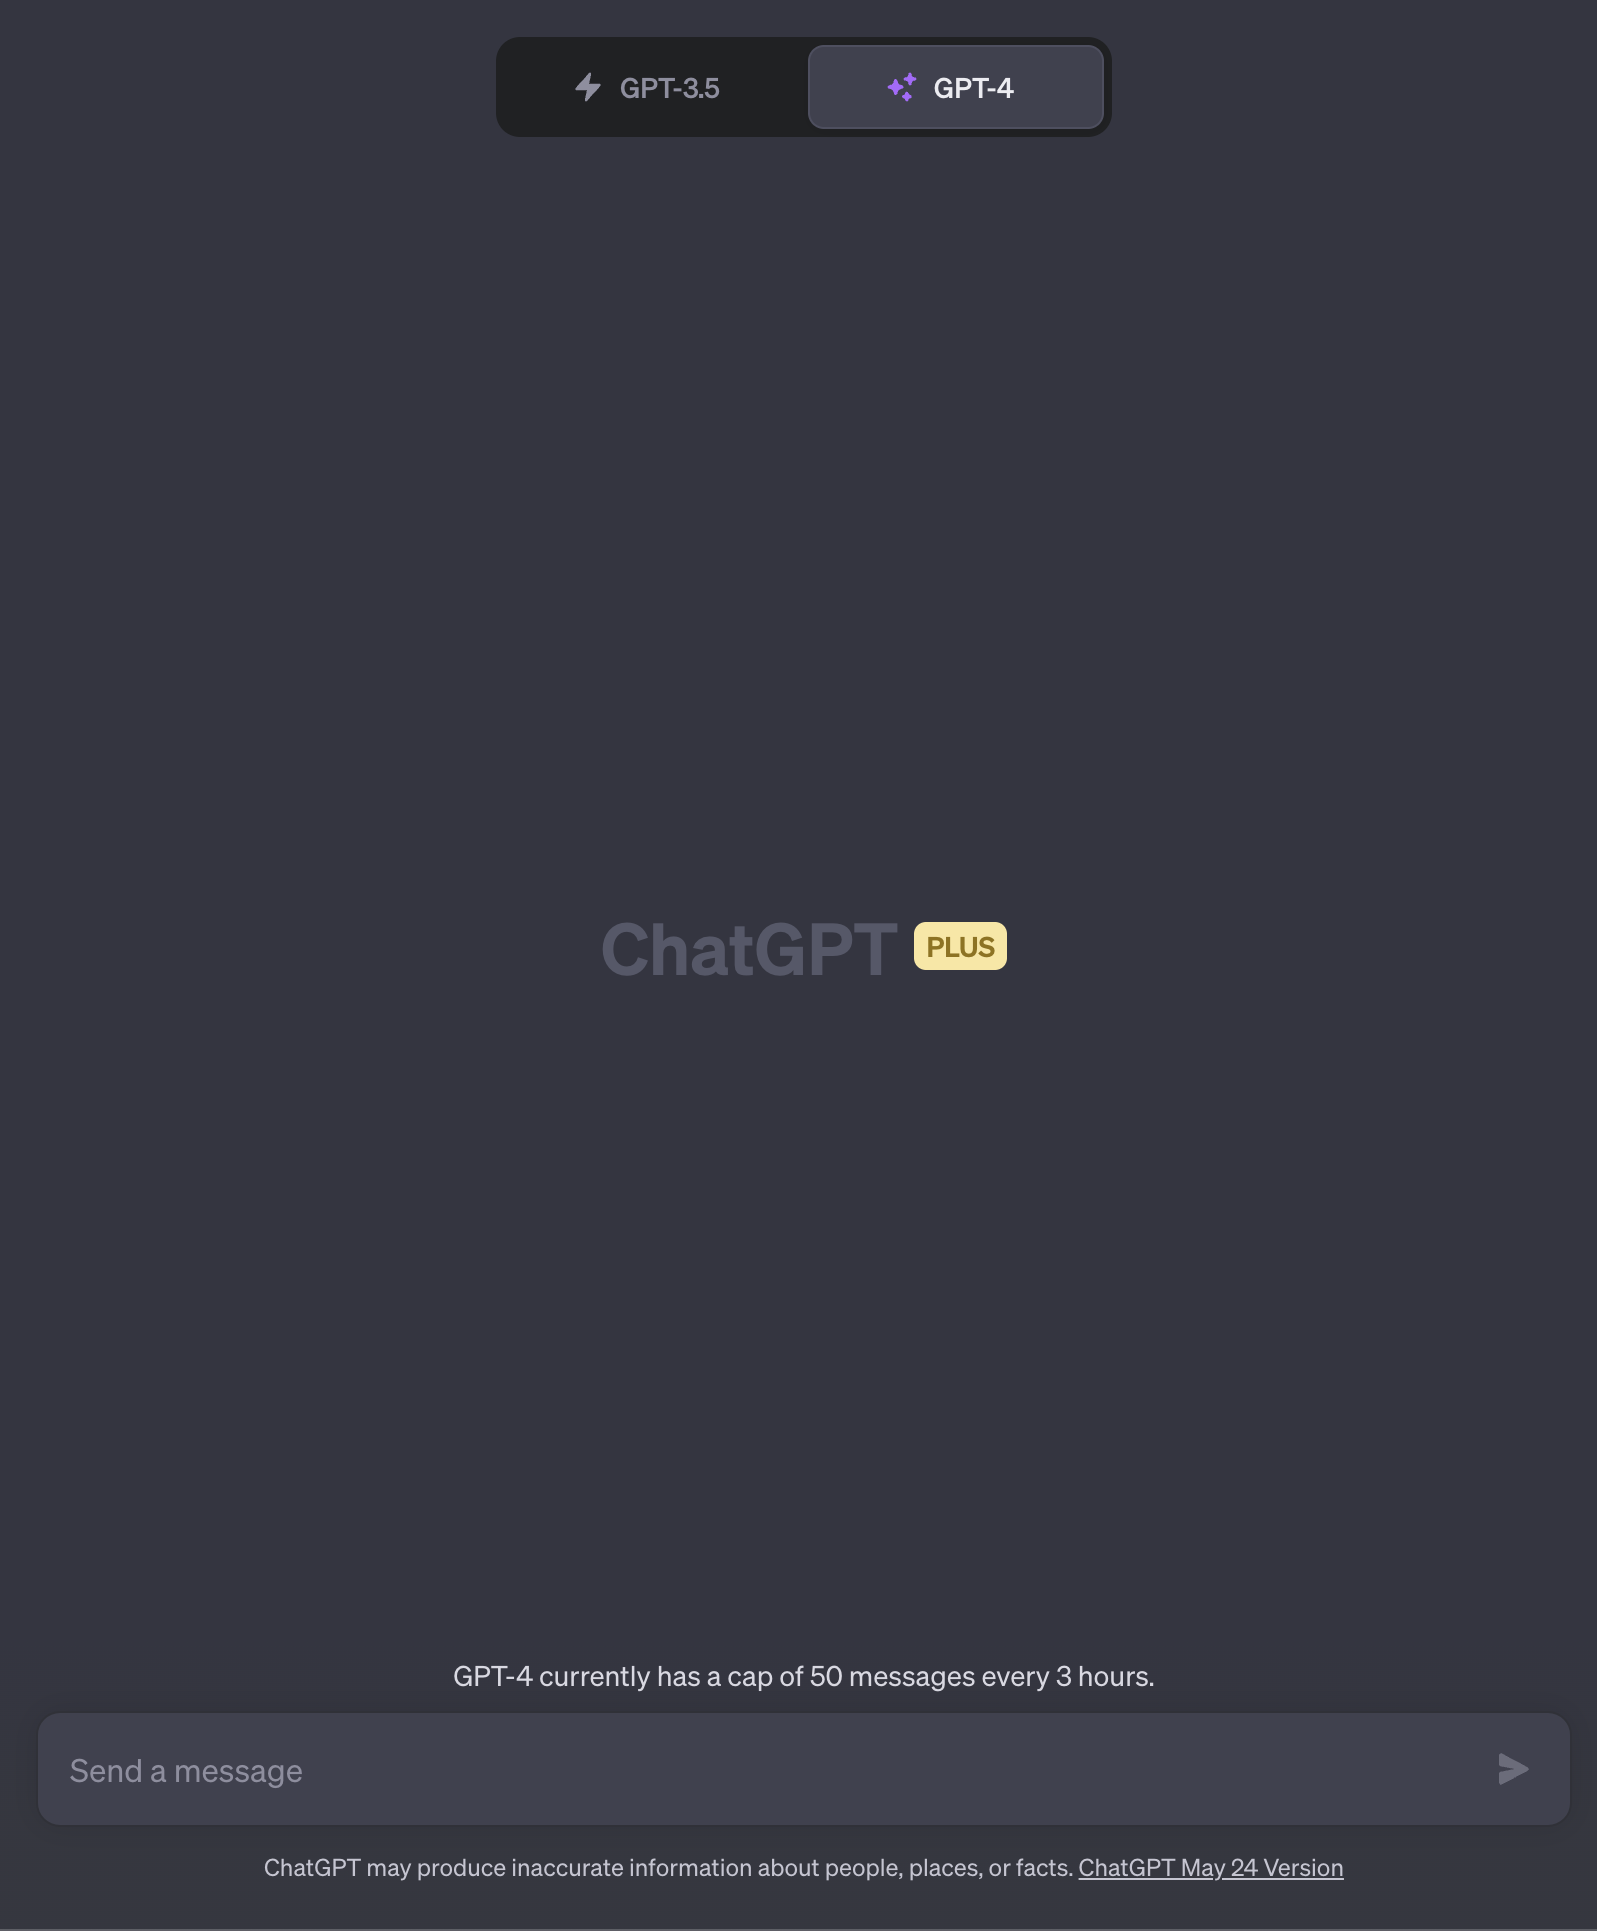 OpenAI Increases GPT-4 Message Cap To 50 For ChatGPT Plus Users